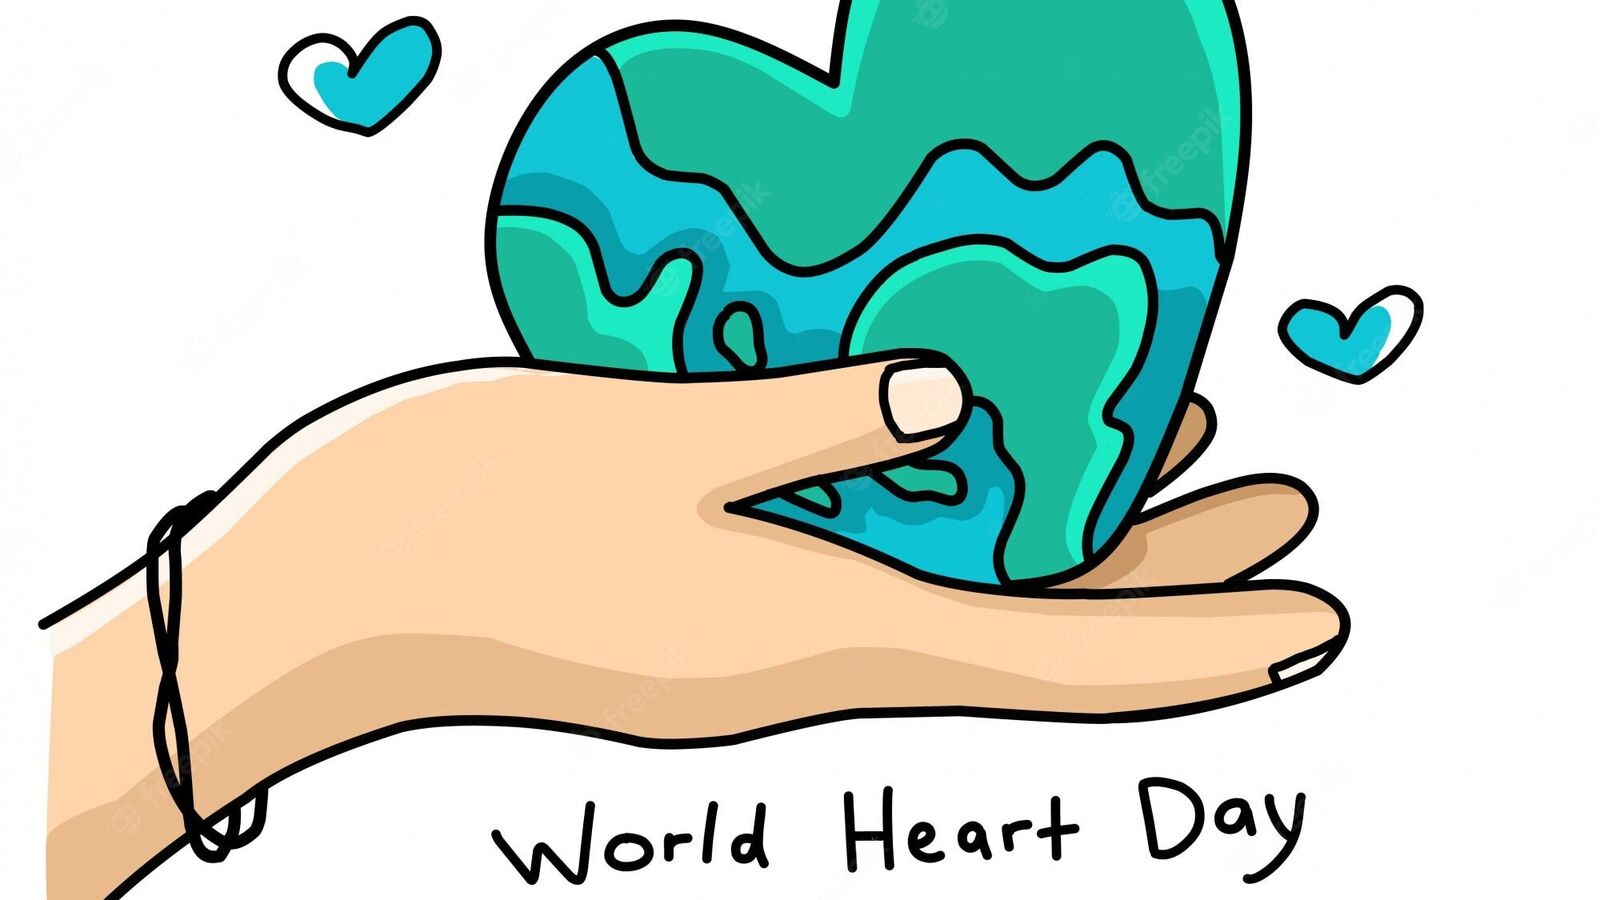 World heart day vector illustration image_picture free download  450083298_lovepik.com